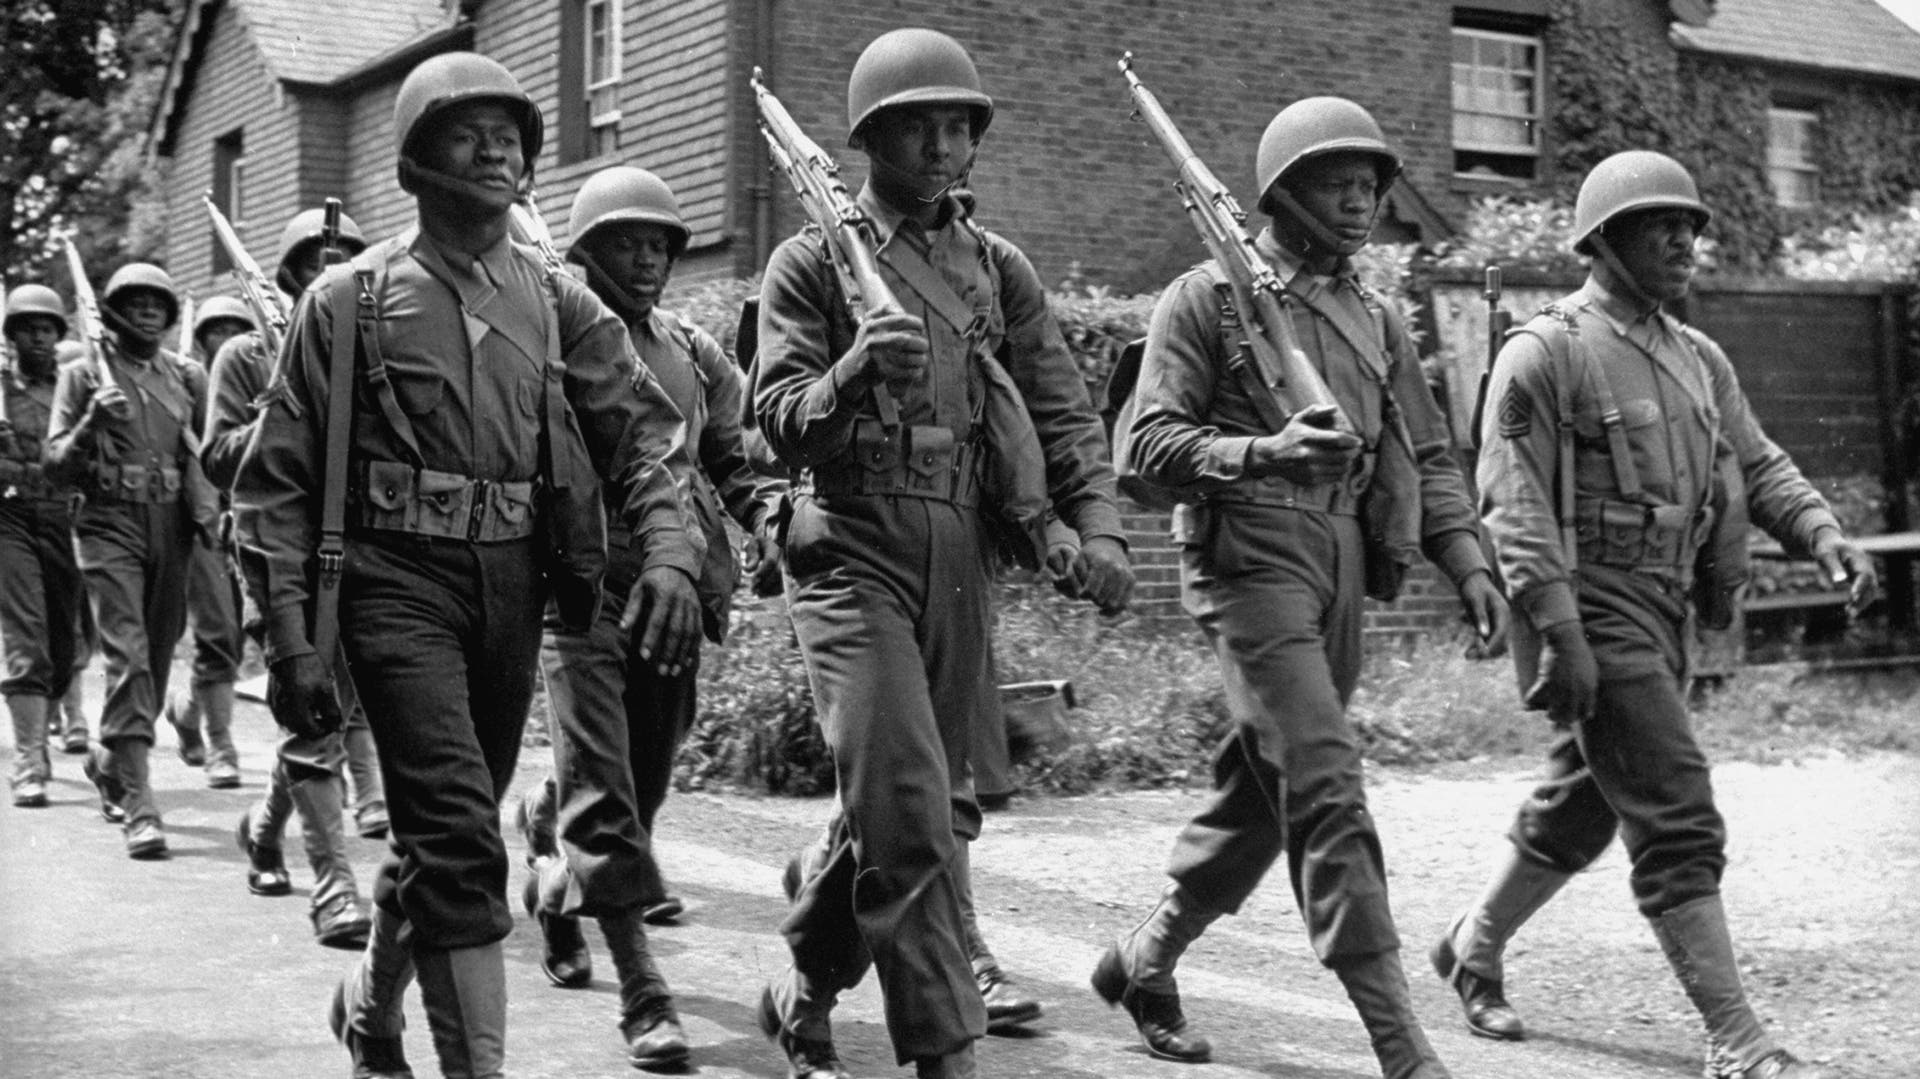 Black Americans Who Served in WWII Faced Segregation and Second-Class Roles